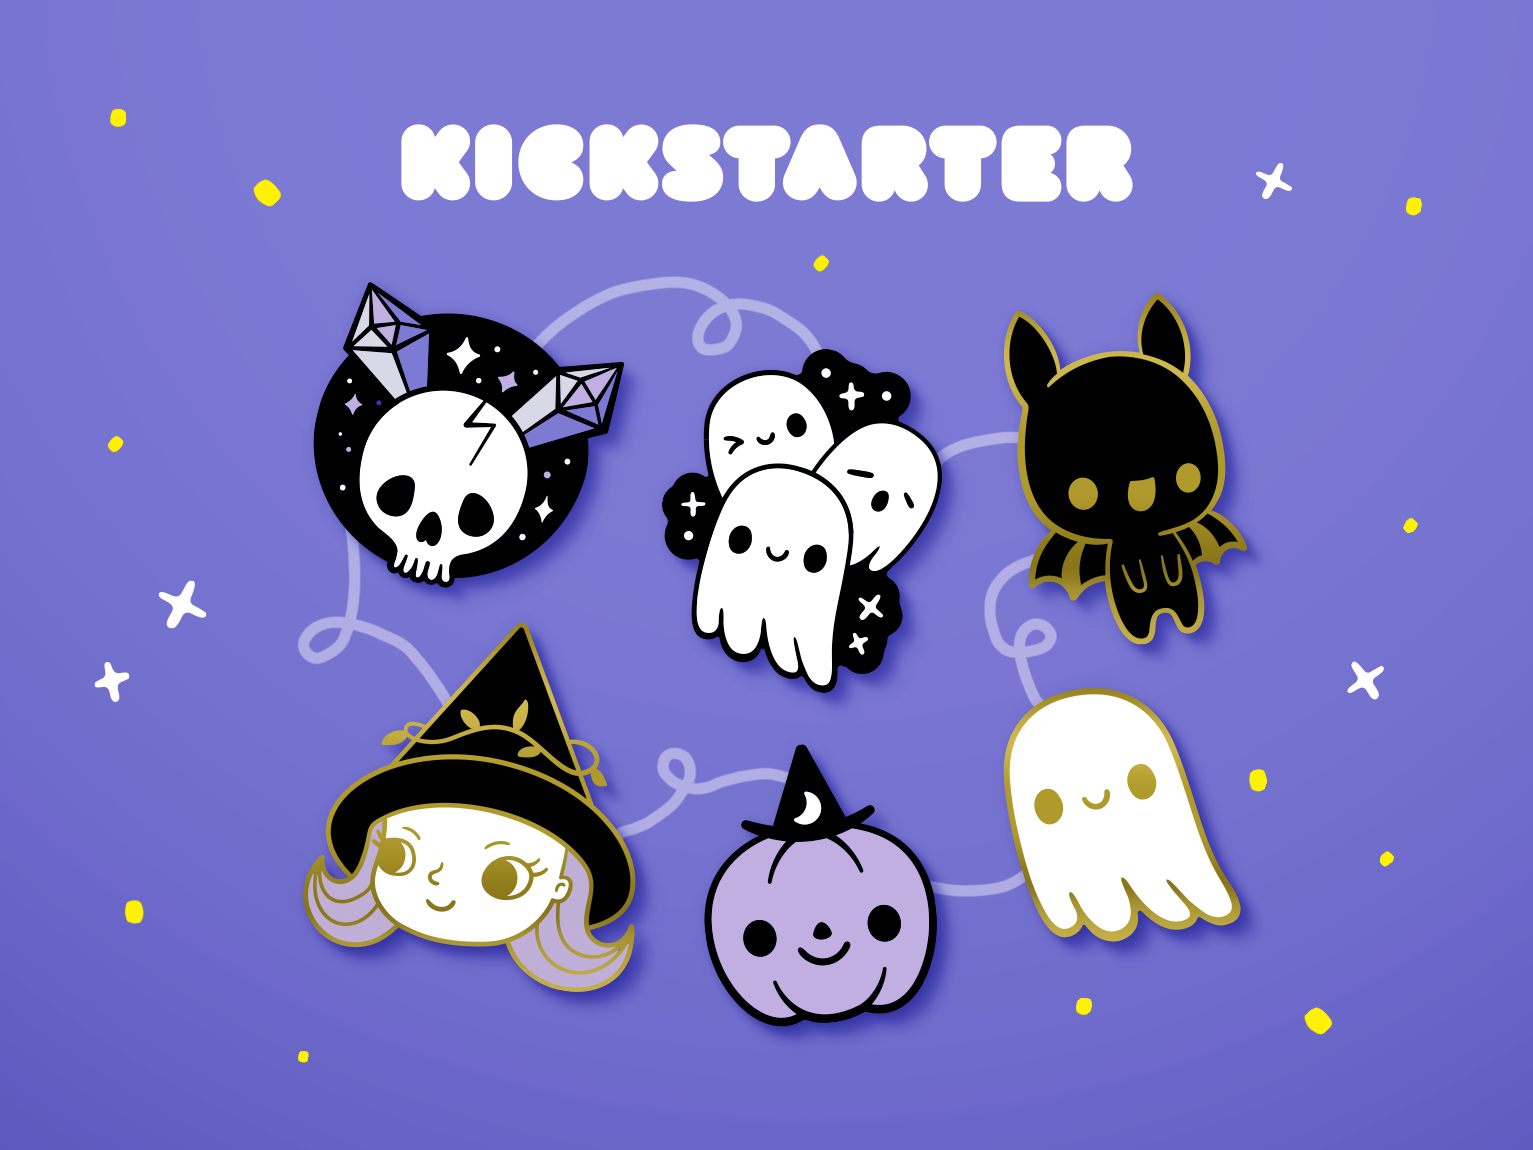 Overfox 10Pcs Halloween Enamel Pin Set Punk Cute Pins for Backpacks Gothic  Skeleton Vampire Skull Witch Pumpkin Ghost Brooch Witchy Jewelry